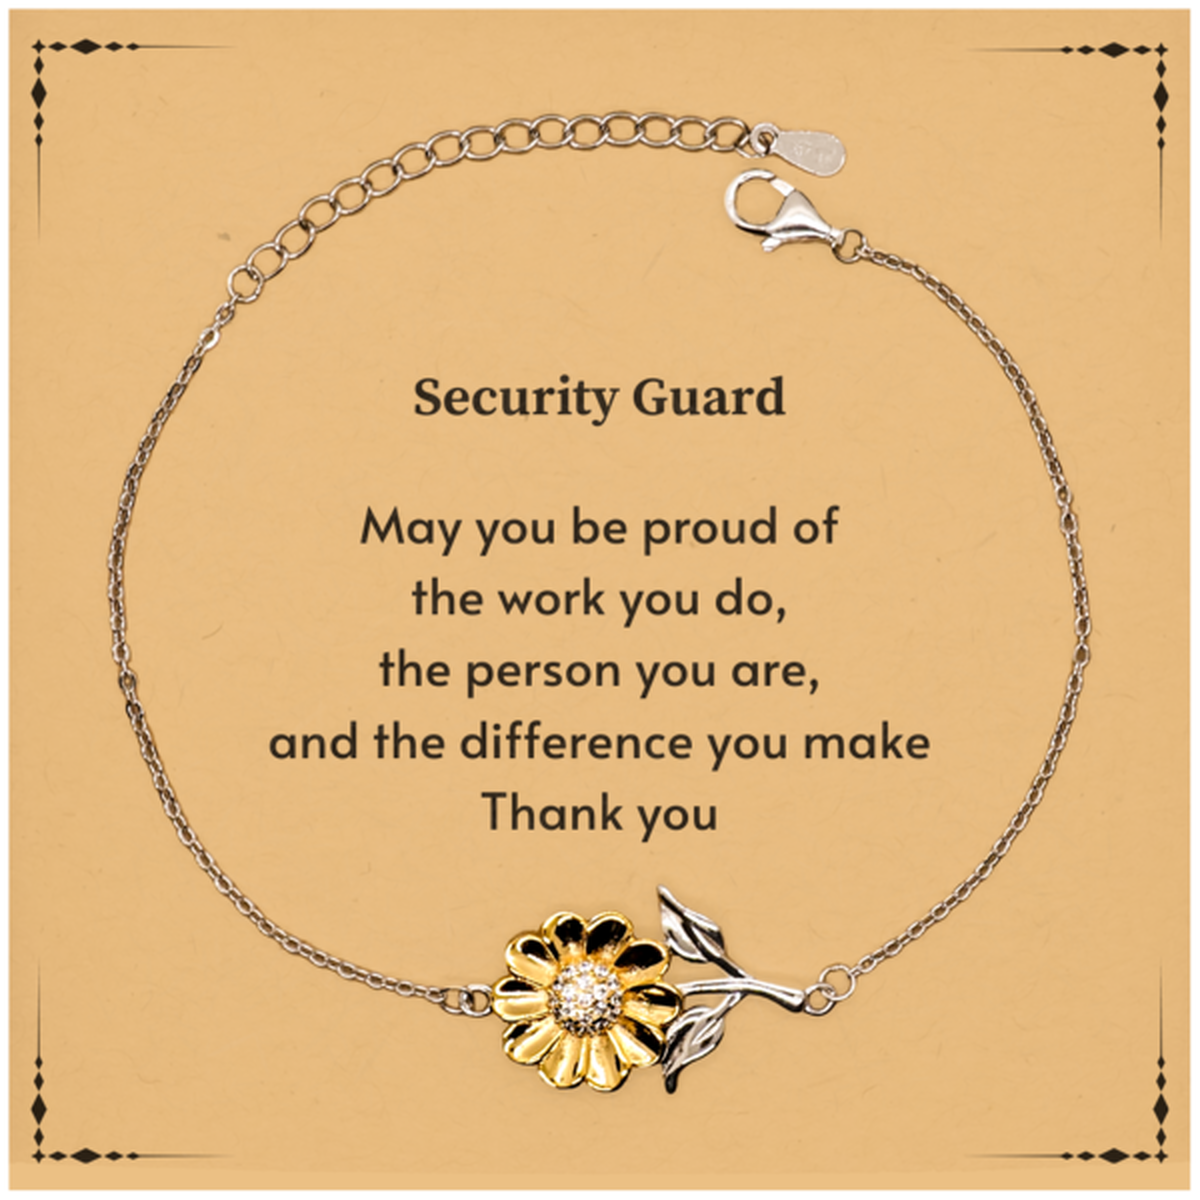 Heartwarming Sunflower Bracelet Retirement Coworkers Gifts for Security Guard, Security Guard May You be proud of the work you do, the person you are Gifts for Boss Men Women Friends